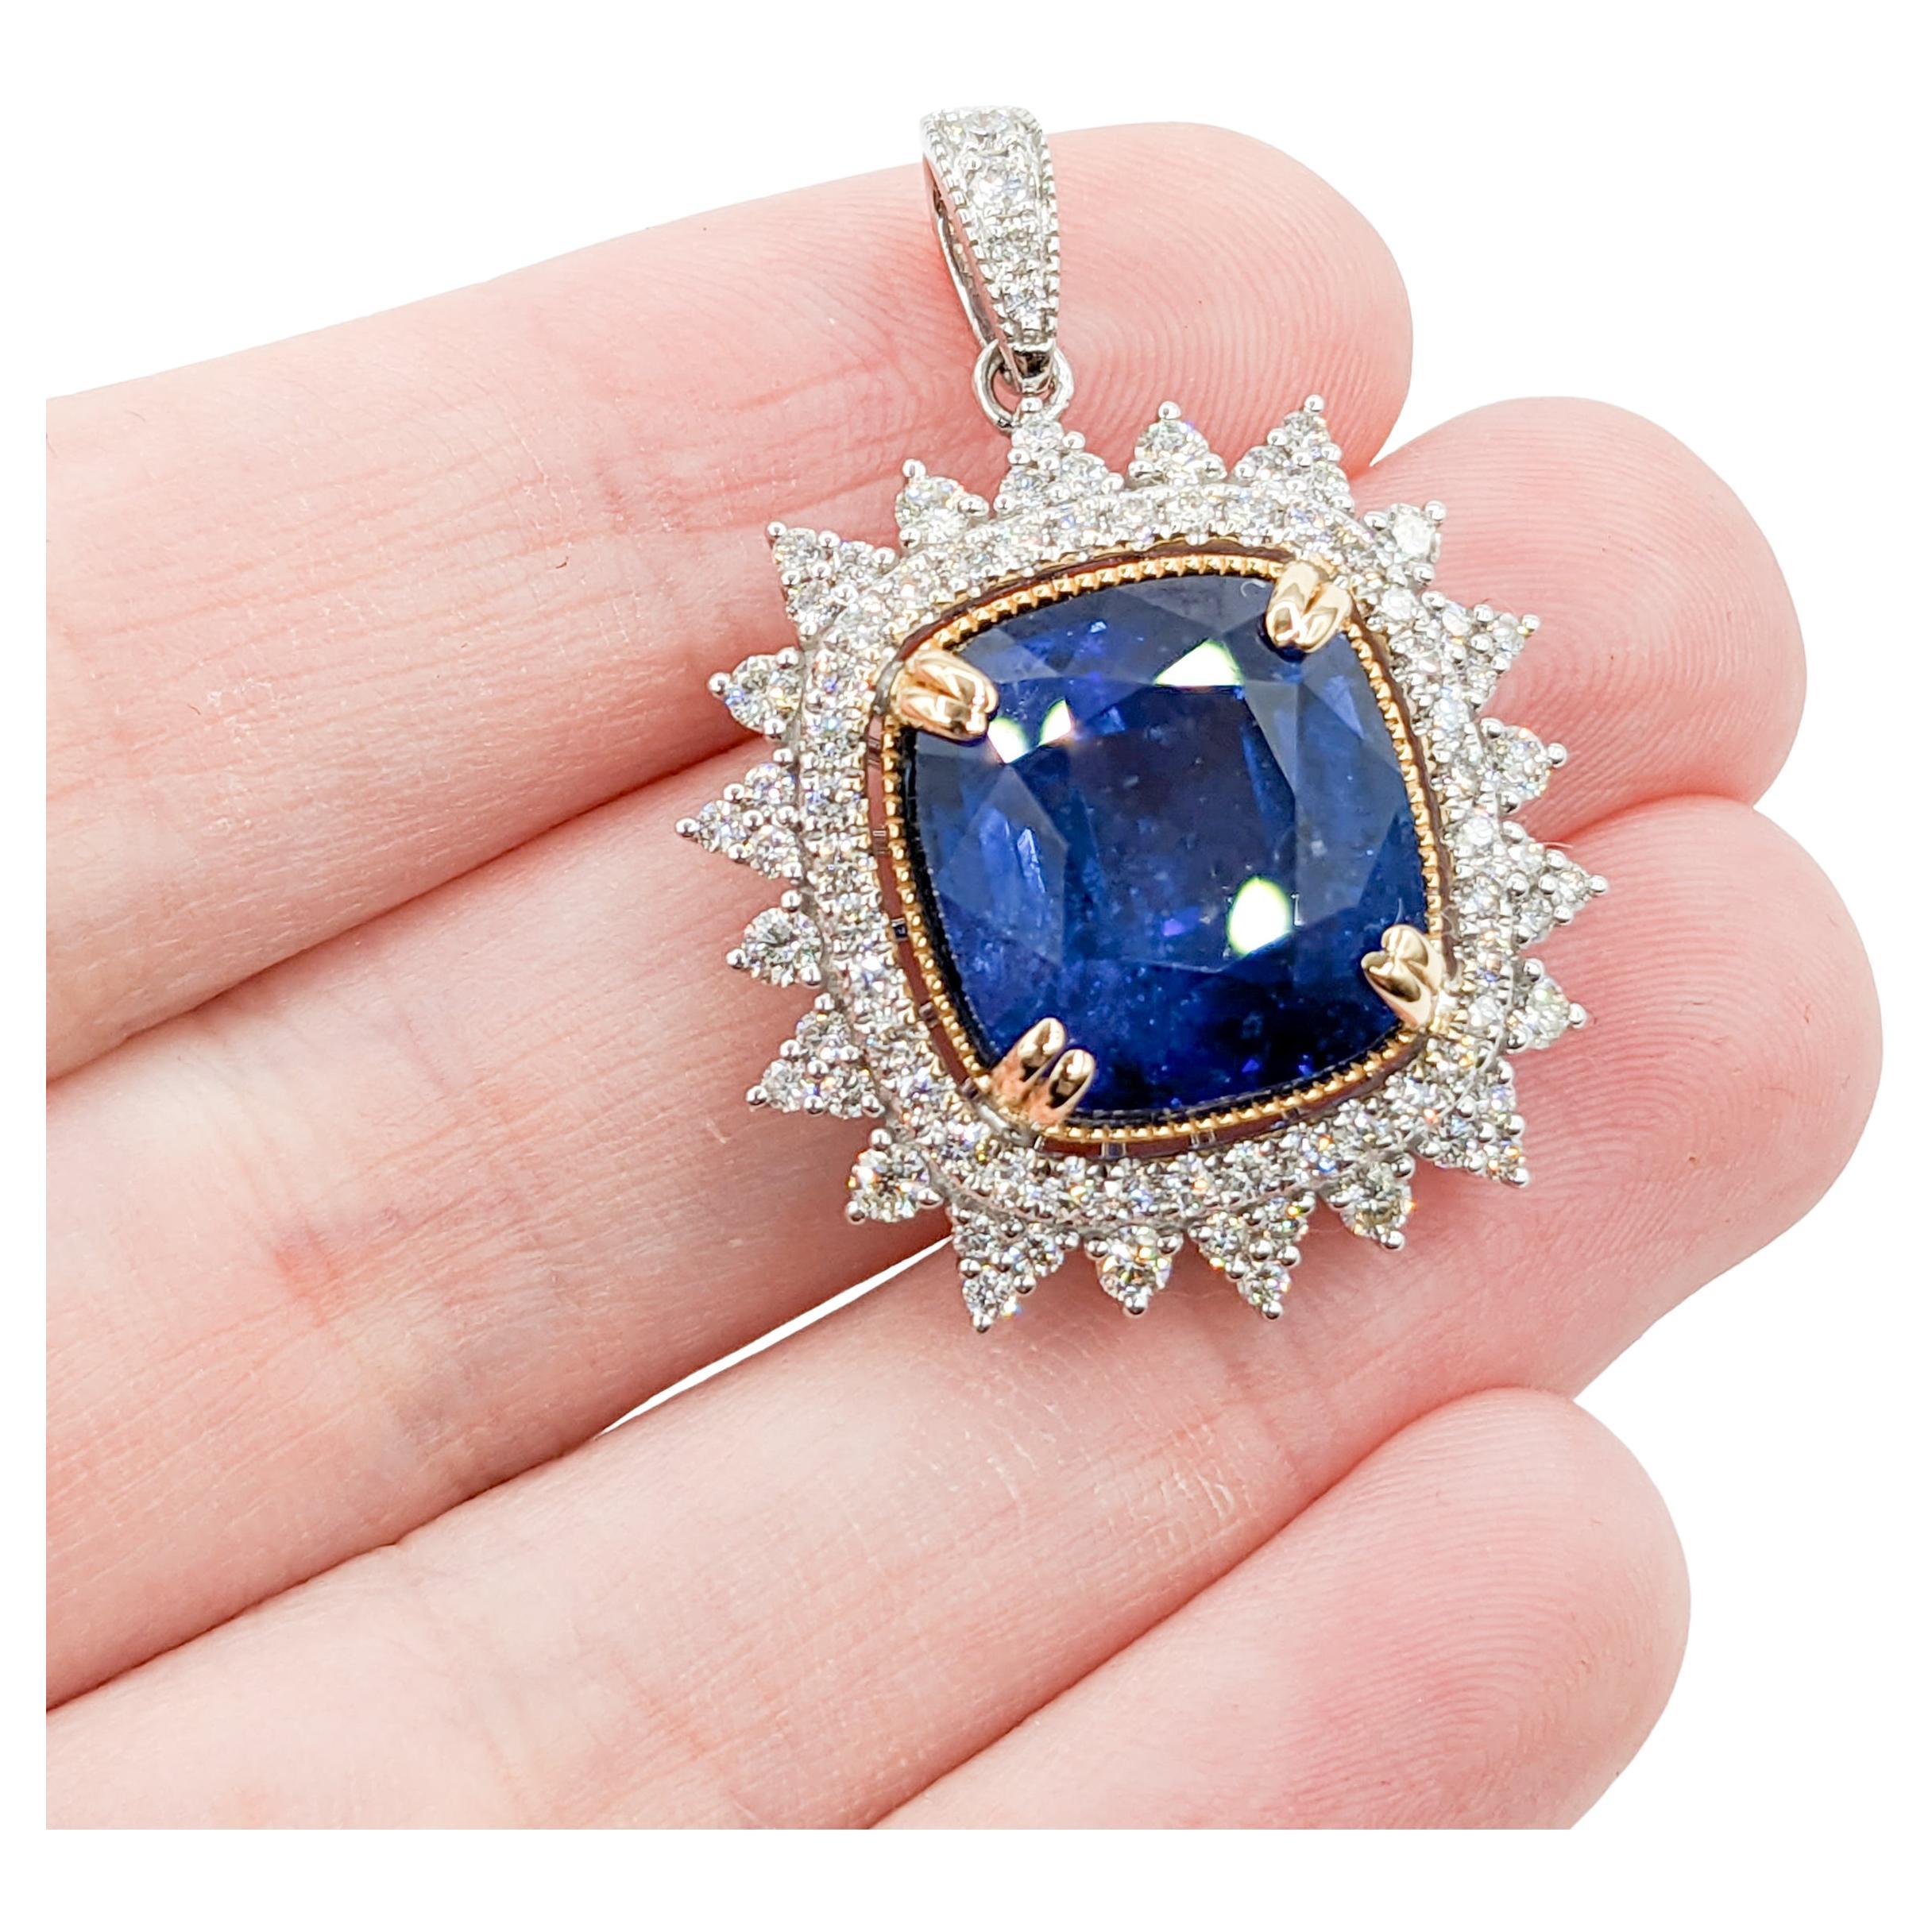 Stunning 14.2ct Sapphire Pendant with Diamond Halo in 14kt White Gold For Sale